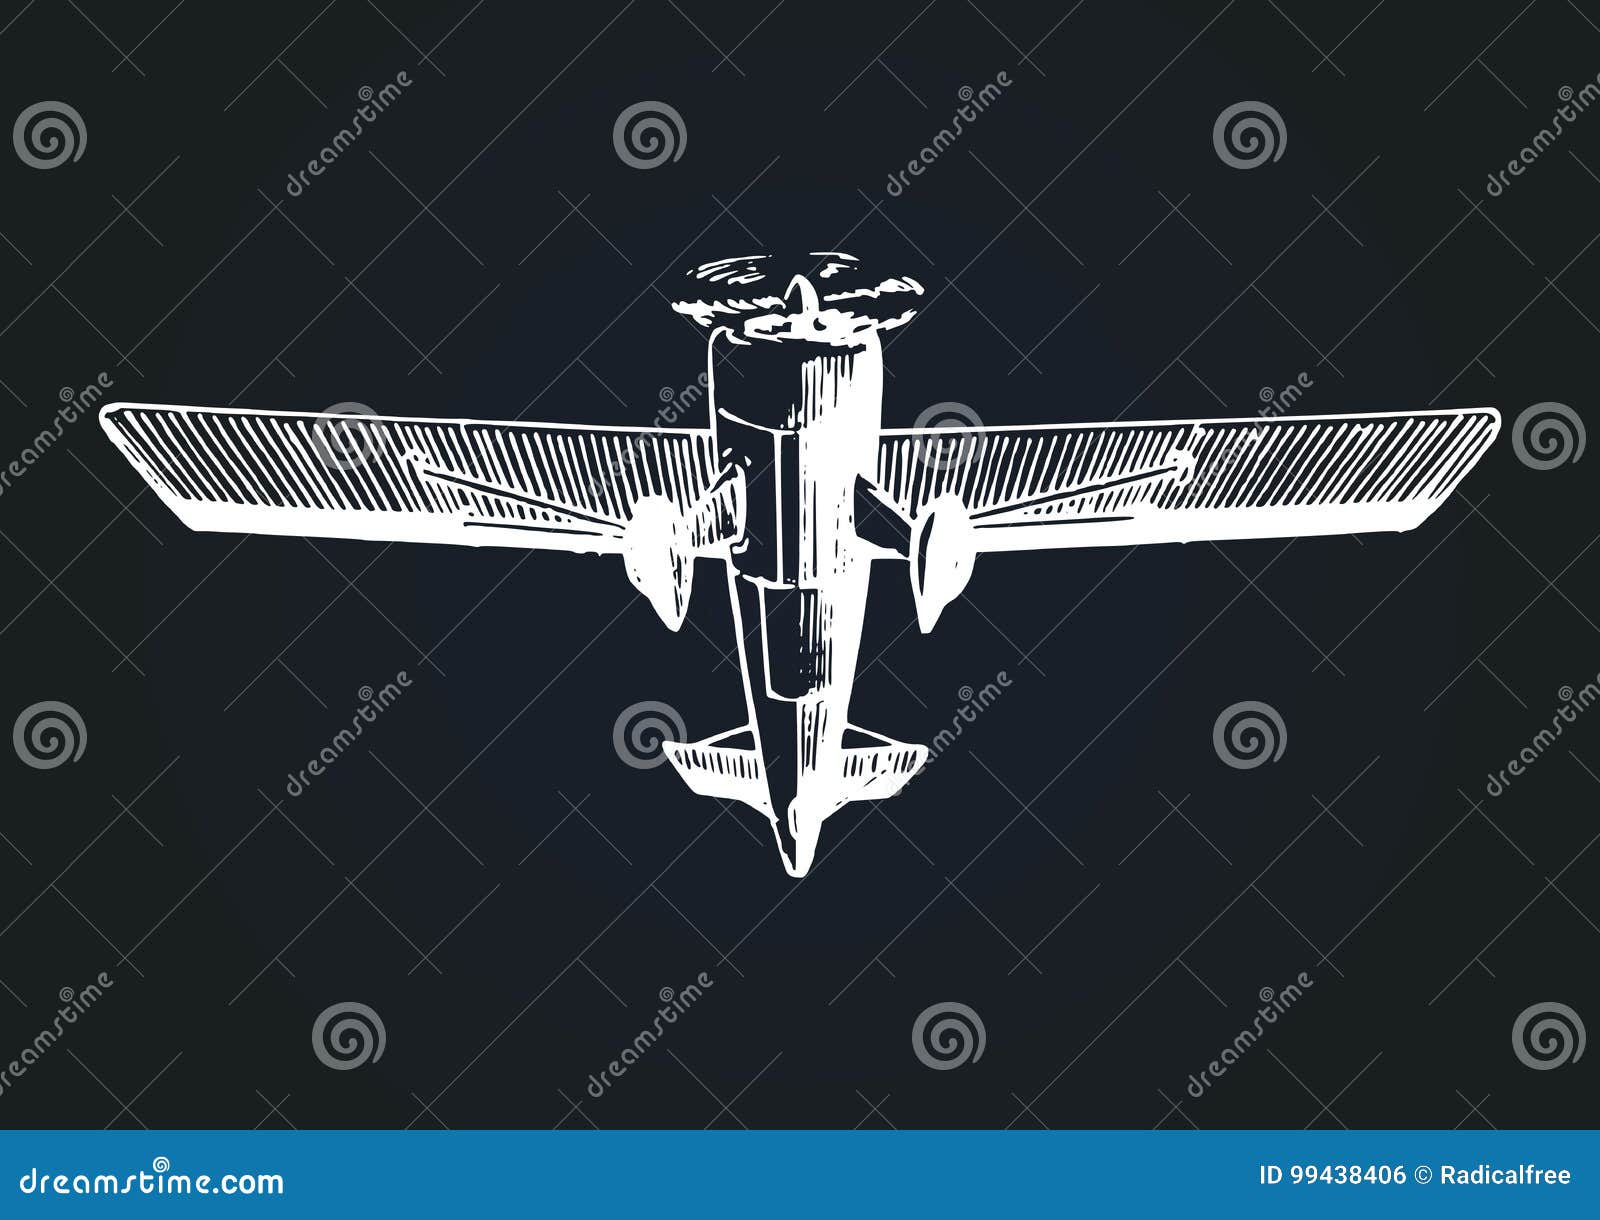  drawing of flying aircraft.vintage retro plane poster, card. hand sketch aviation  in engraving style